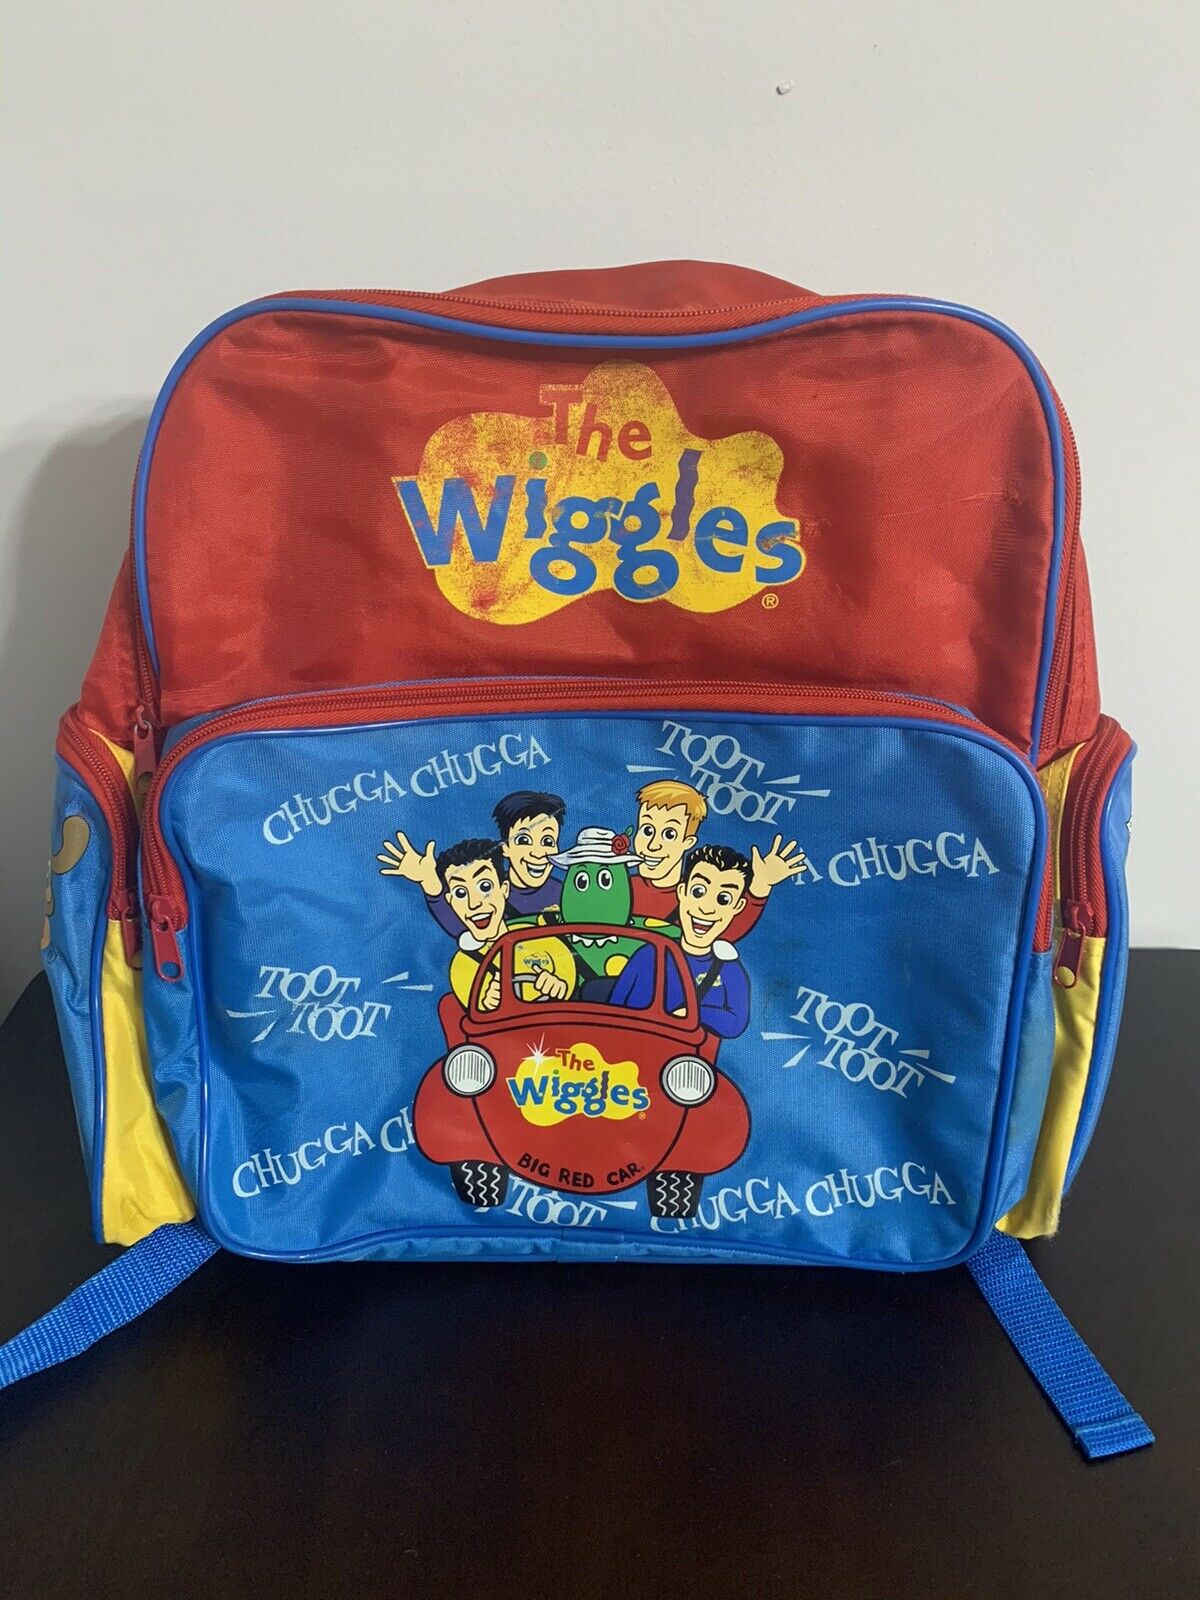 The Cartoon Wiggles Backpack PNG by seanscreations1 on DeviantArt